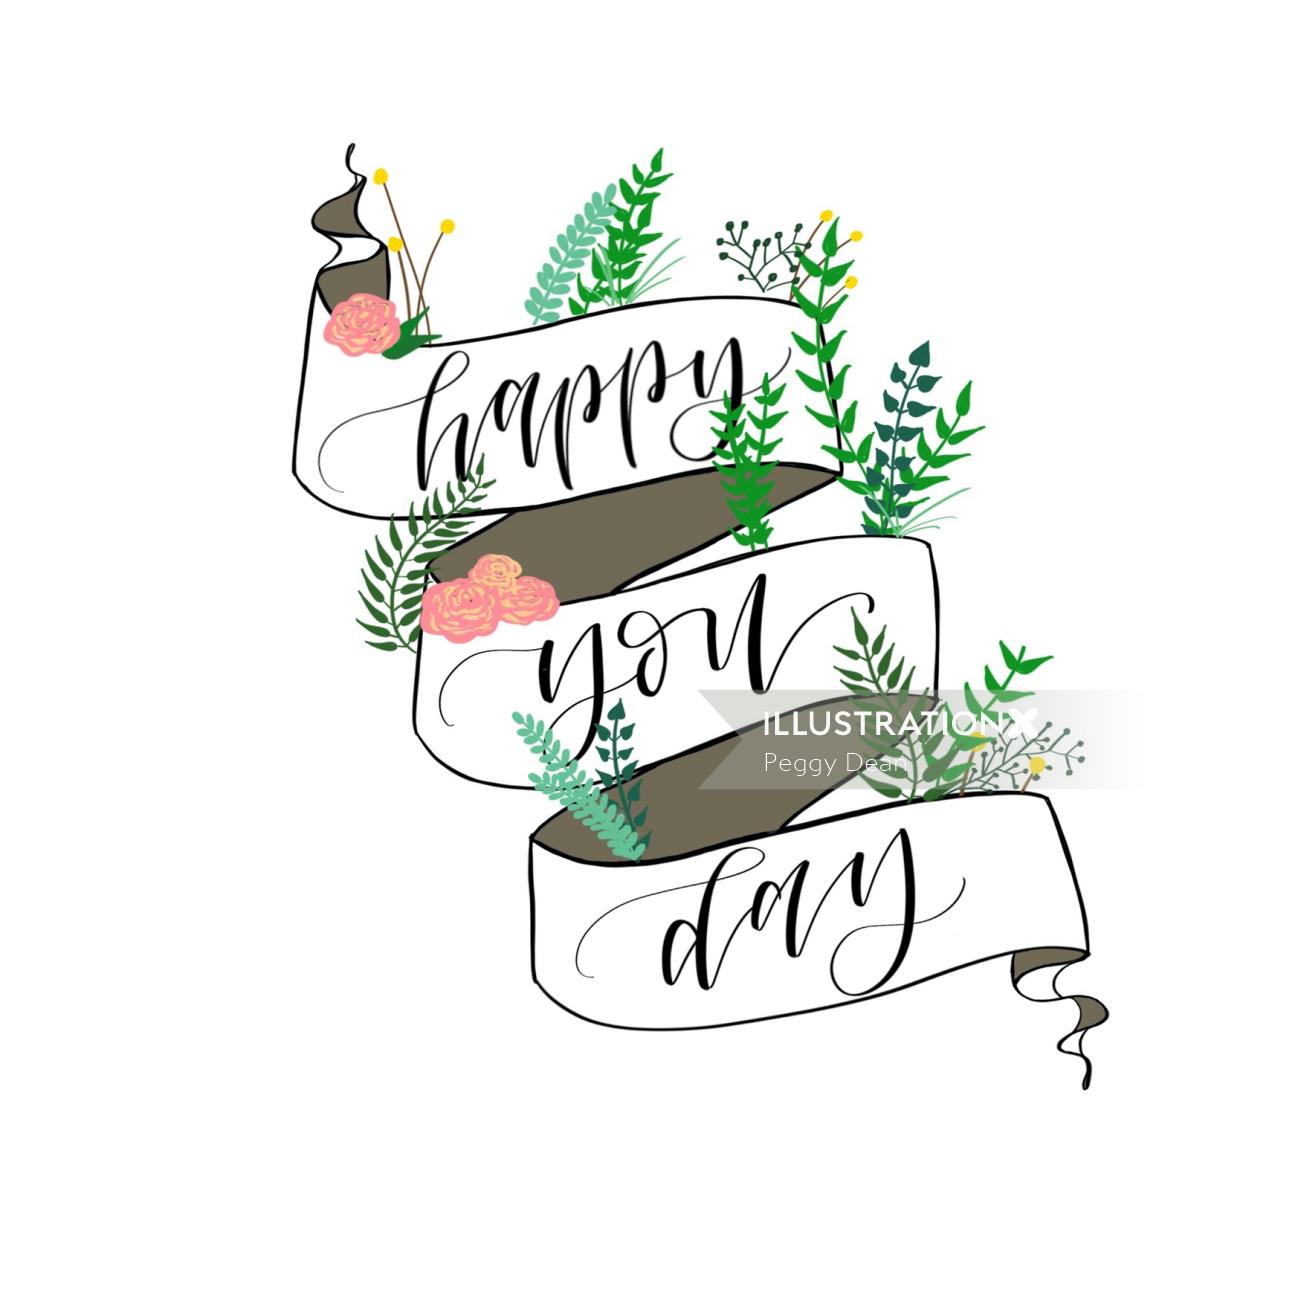 Lettering art of happy you day 